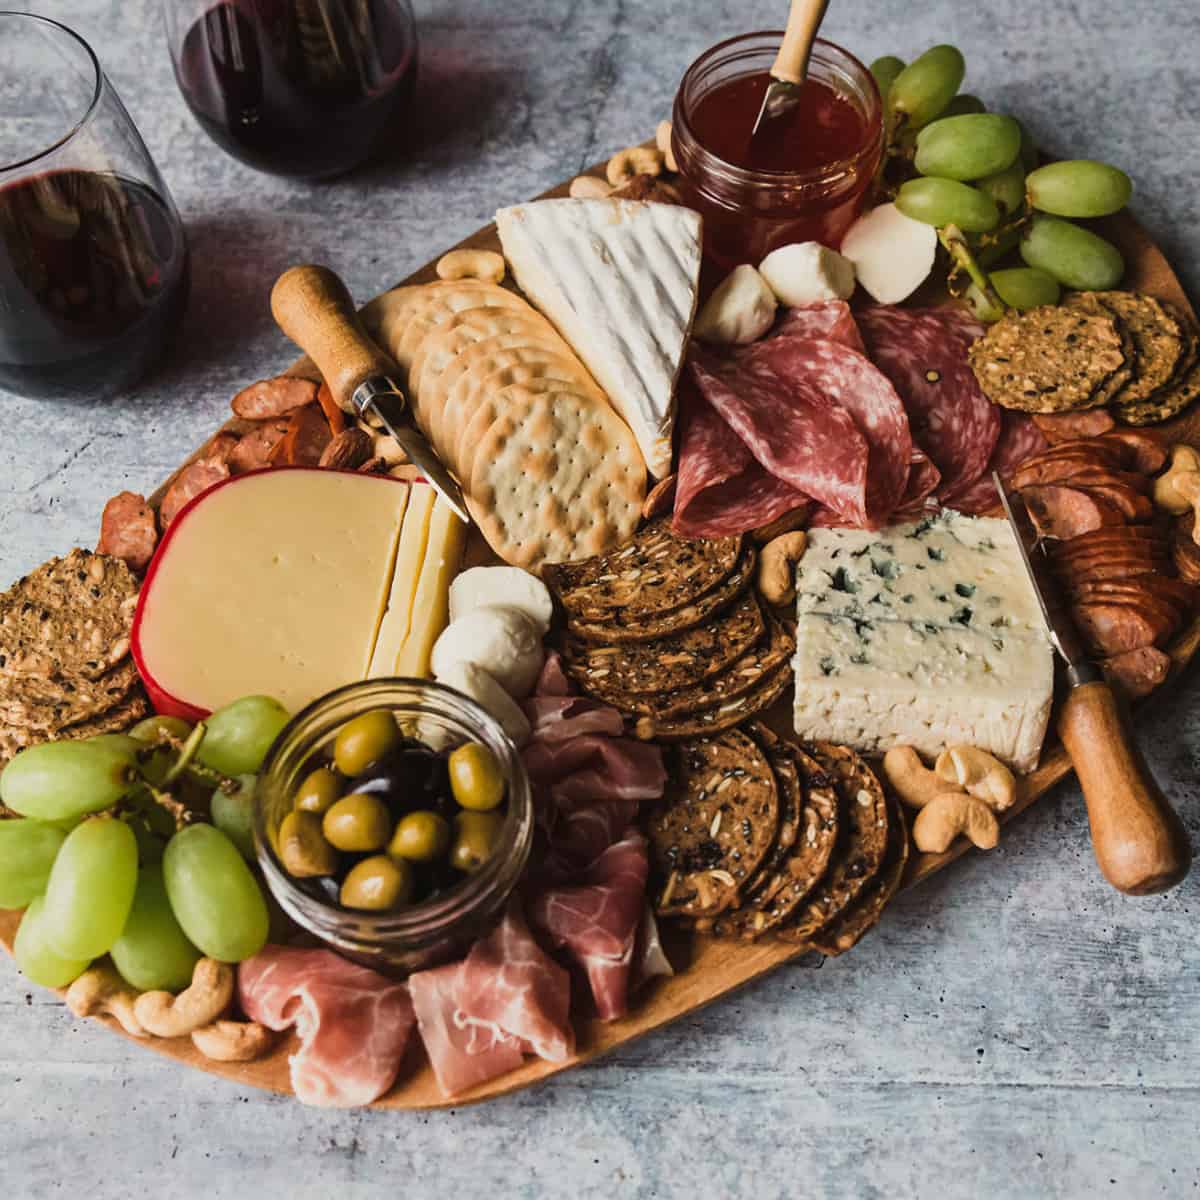 Wooden style serving tray as a charcuterie board